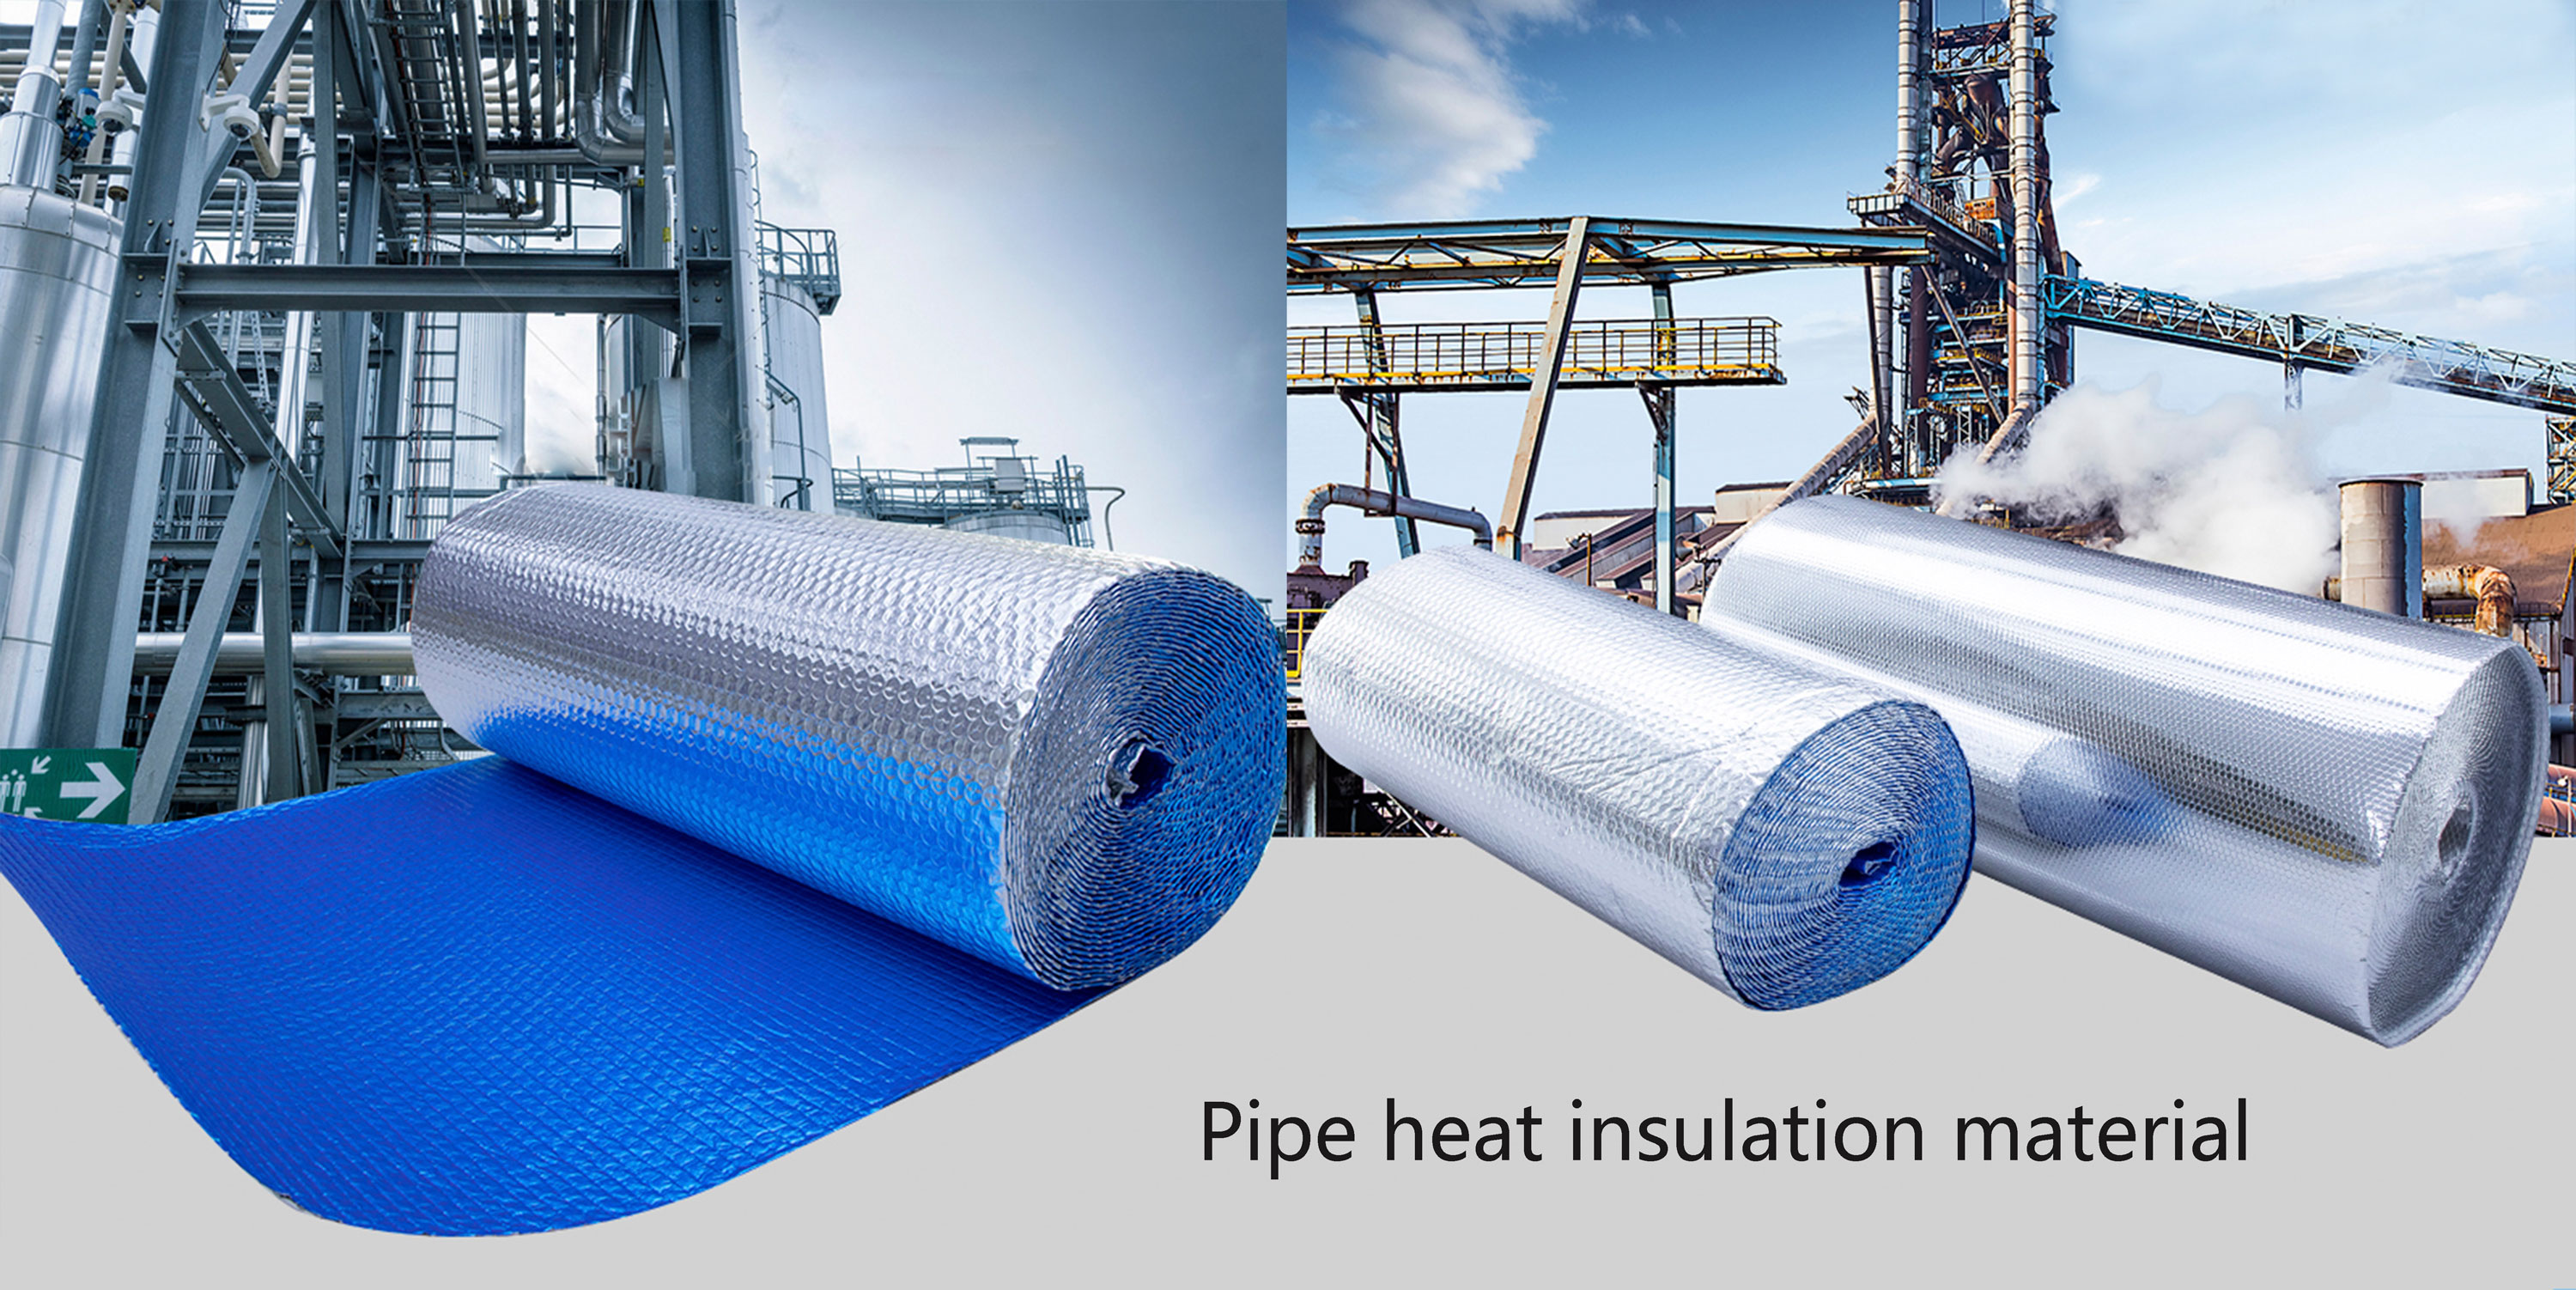 Pipe heat insulation material